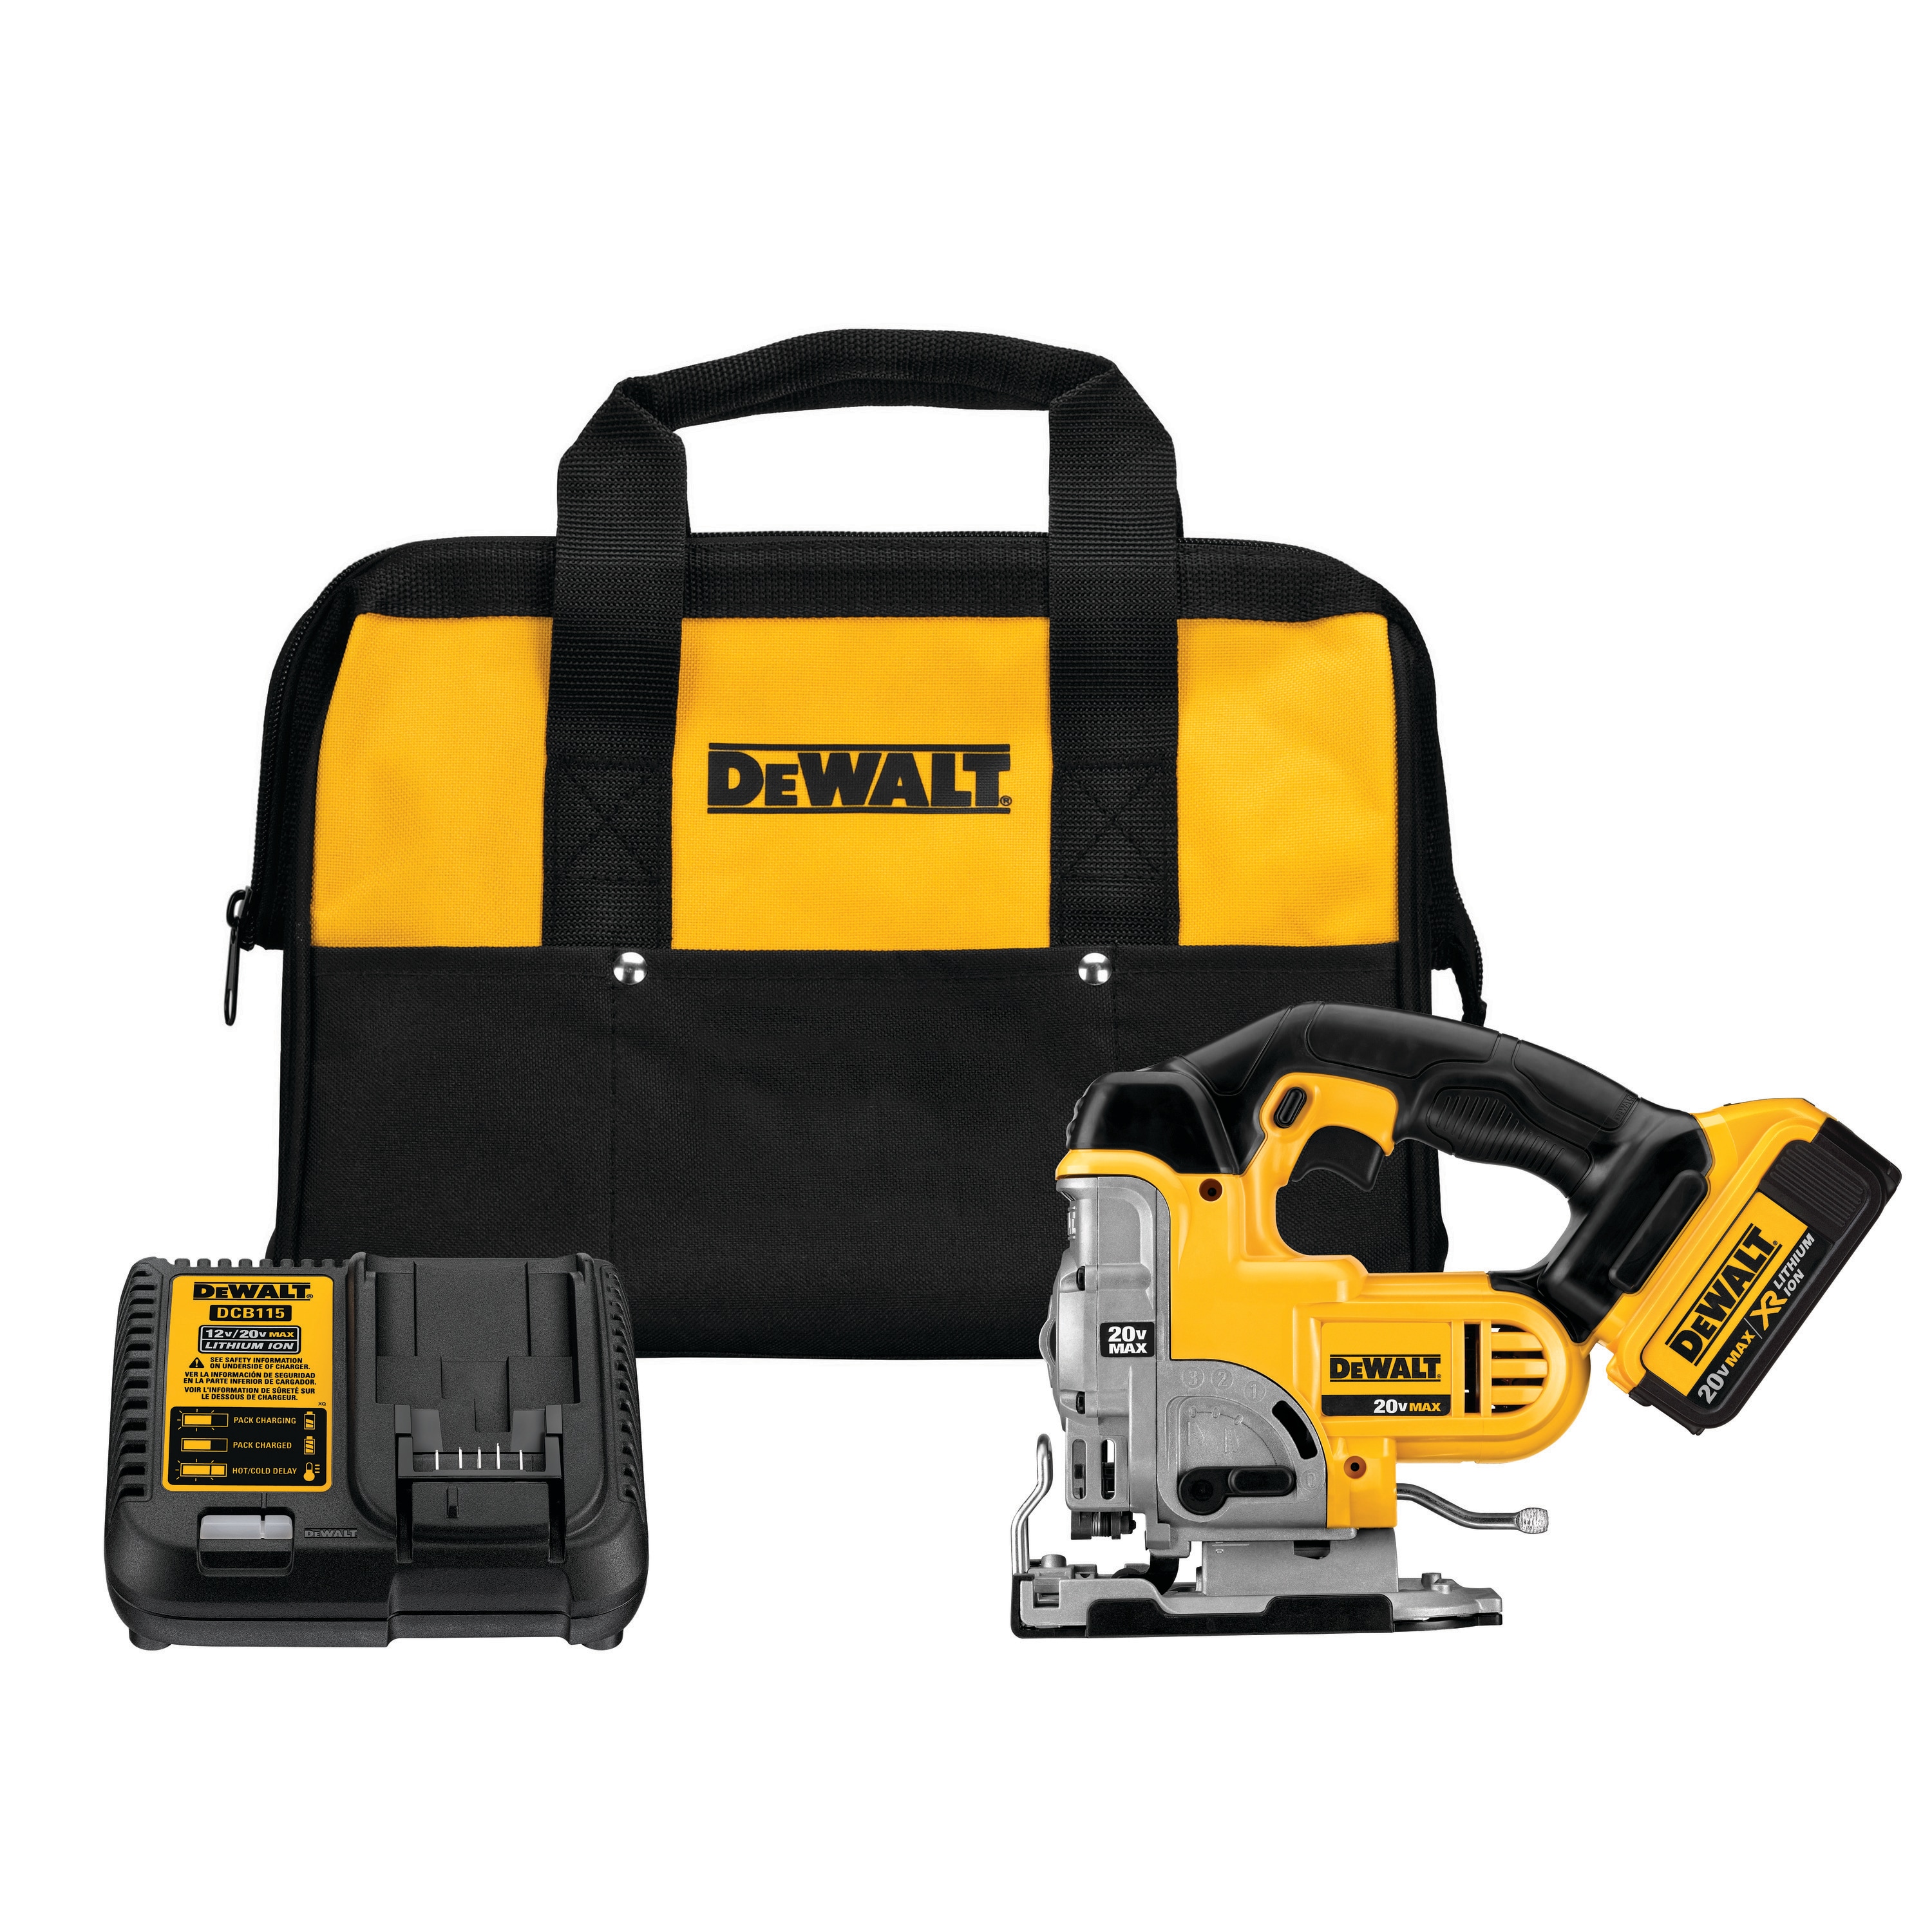 undervandsbåd frelsen moral DEWALT 20-Volt Max Variable Speed Keyless Cordless Jigsaw (Charger Included  and Battery Included) in the Jigsaws department at Lowes.com